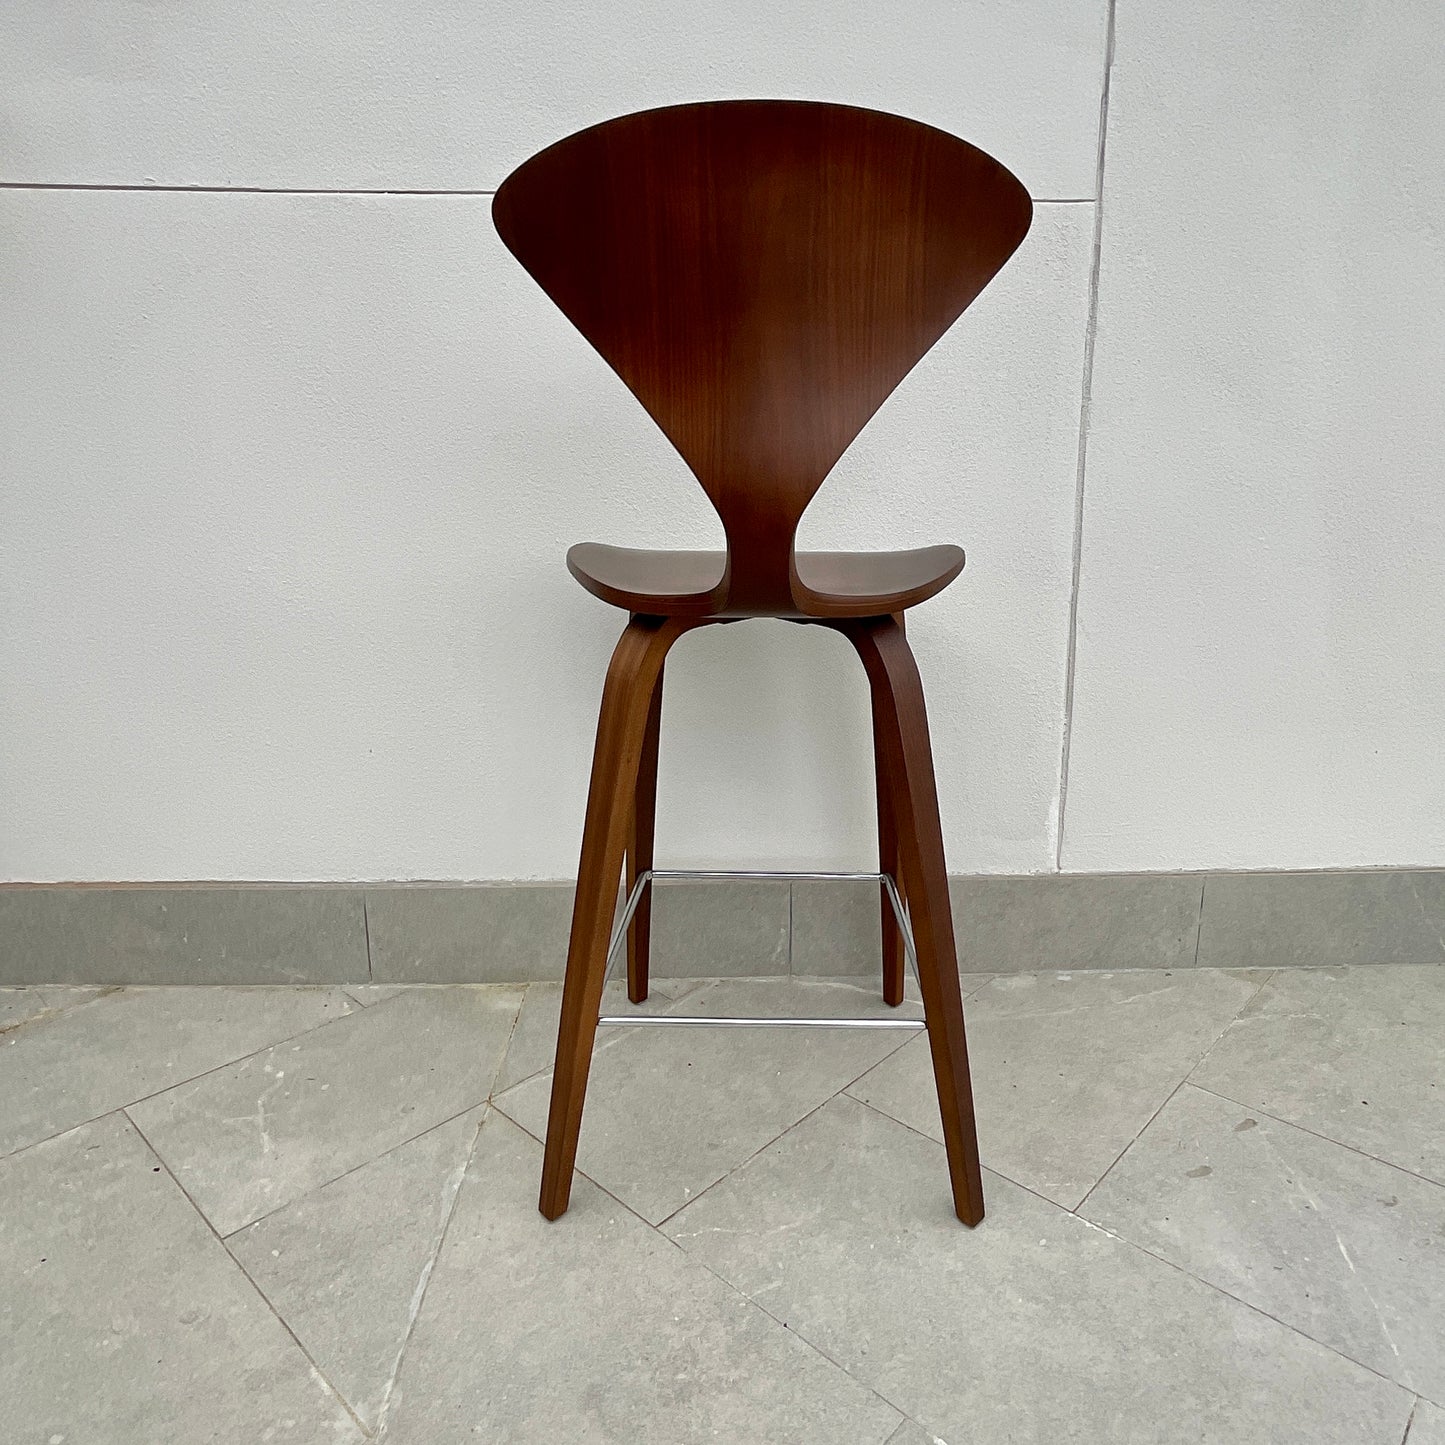 Cherner Barstool by Norman Cherner (2 available)